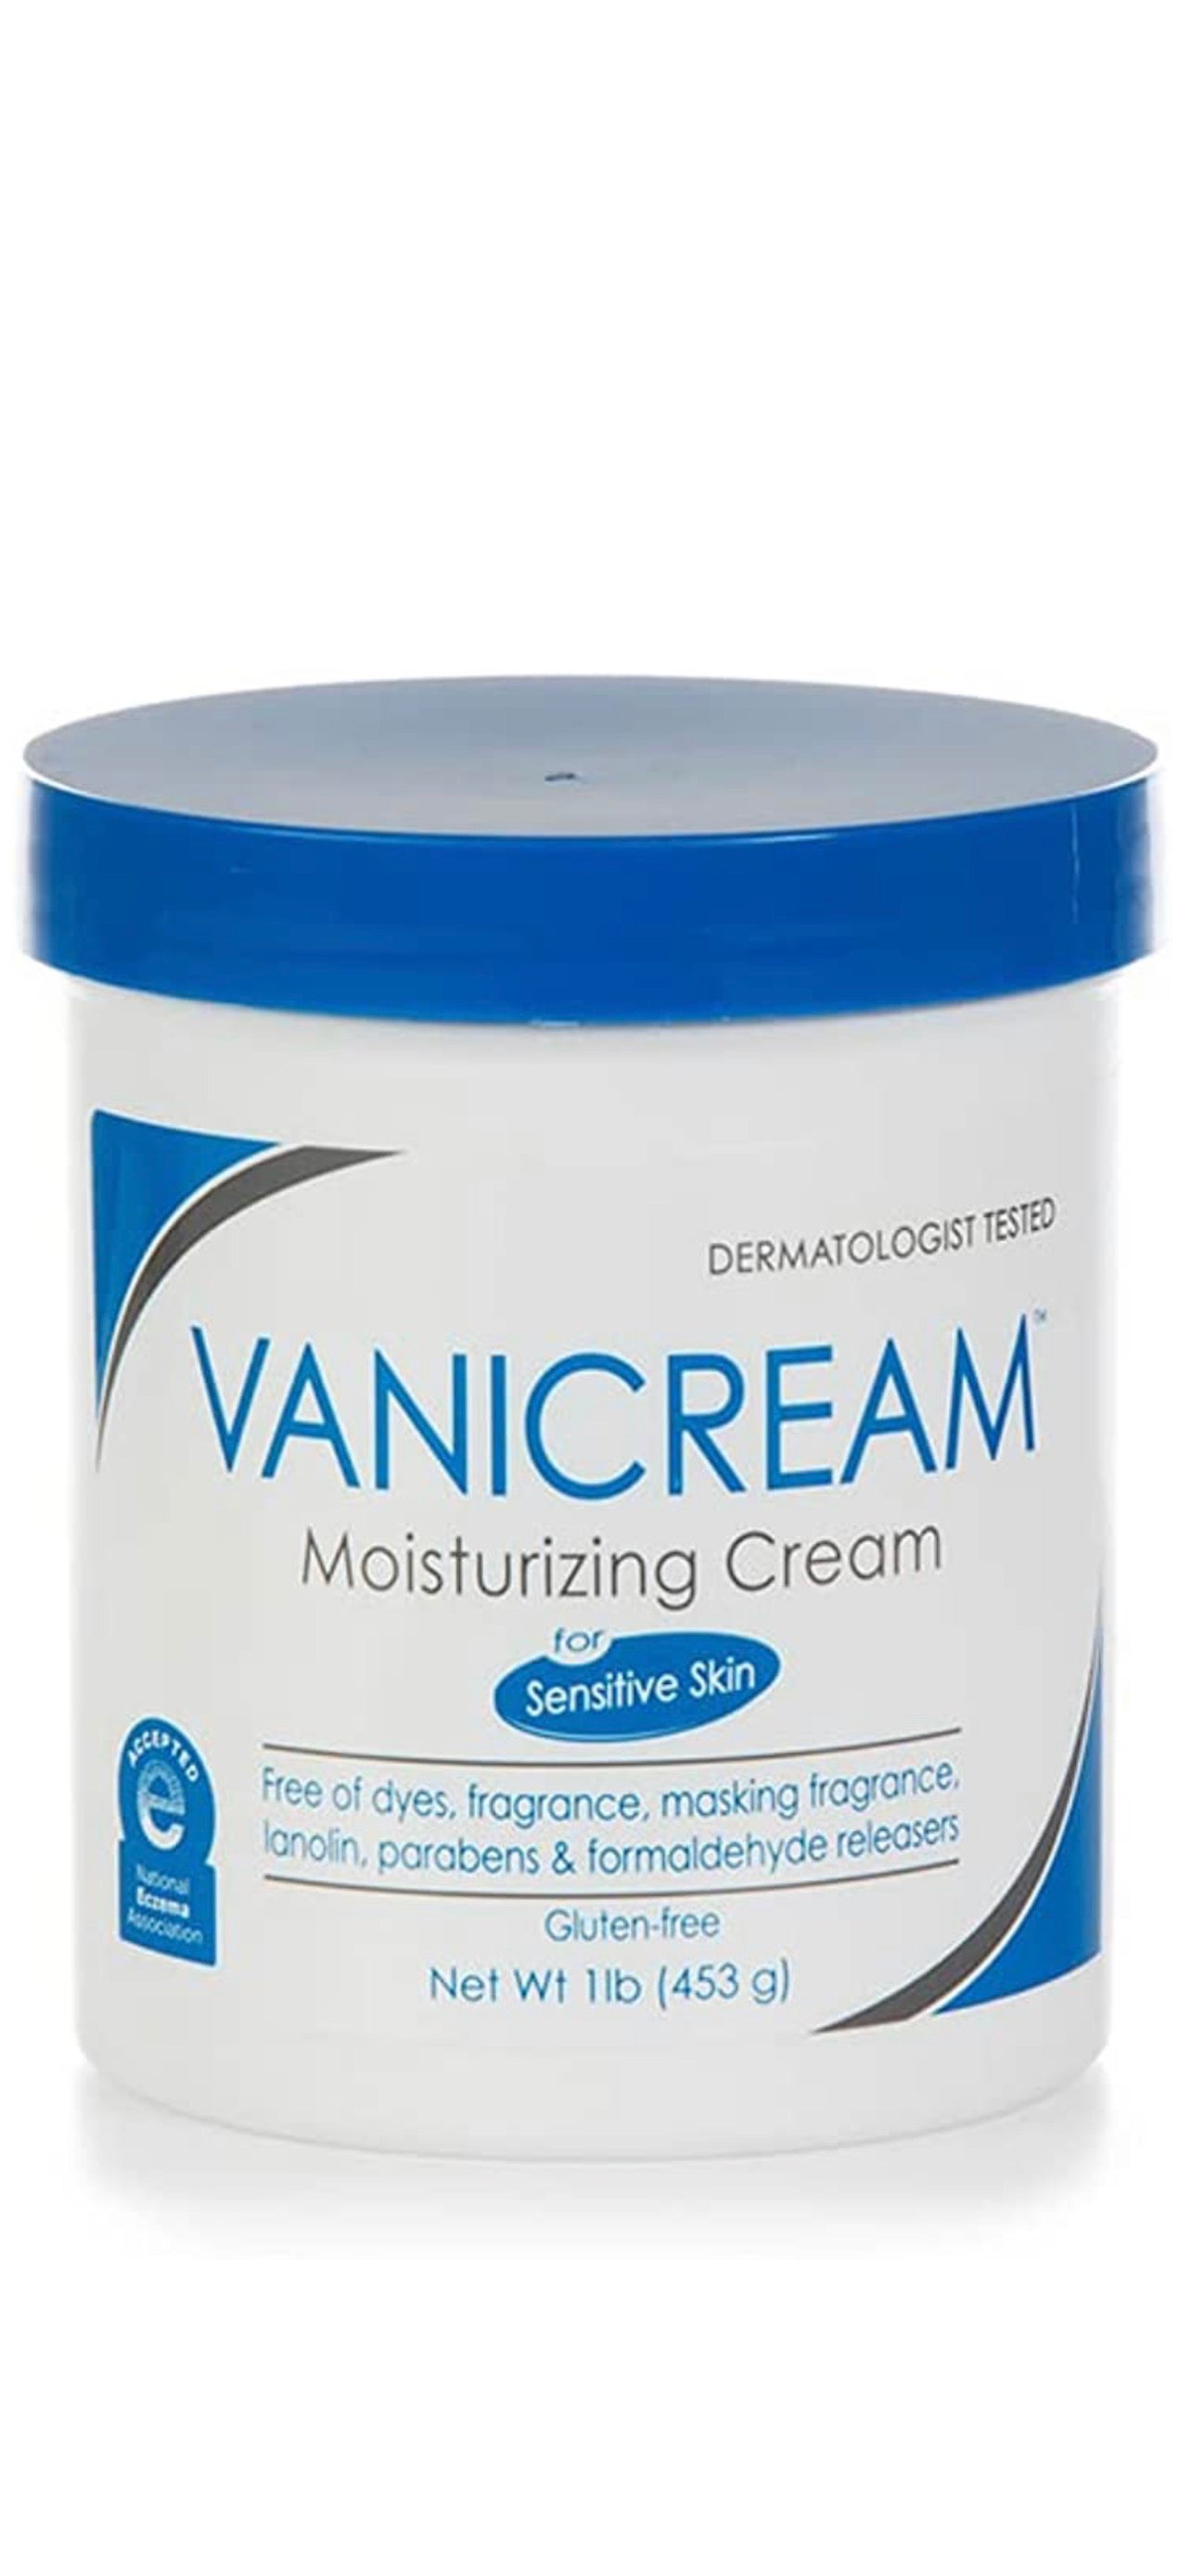 Vanicream MOISTURIZING SKIN CREAM REFILL for SENSITIVE SKIN - 16 fl oz (1 lb) - Moisturizer Formulated Without Common Irritants for Those with Sensitive Skin - Supporting ORCRF.org